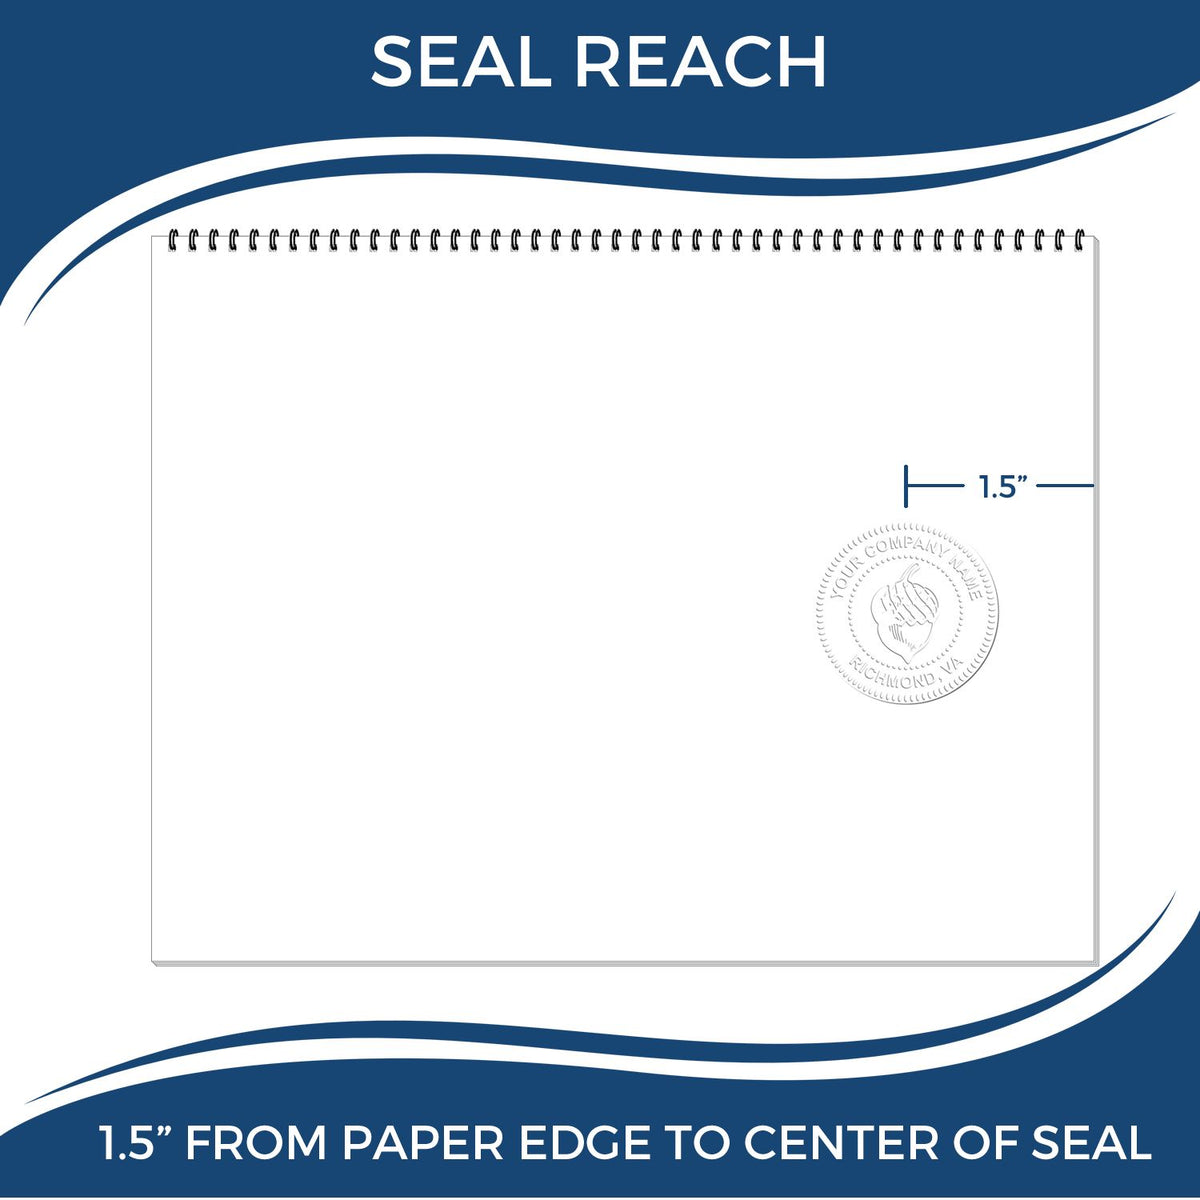 An infographic showing the seal reach which is represented by a ruler and a miniature seal image of the Hybrid New Mexico Landscape Architect Seal